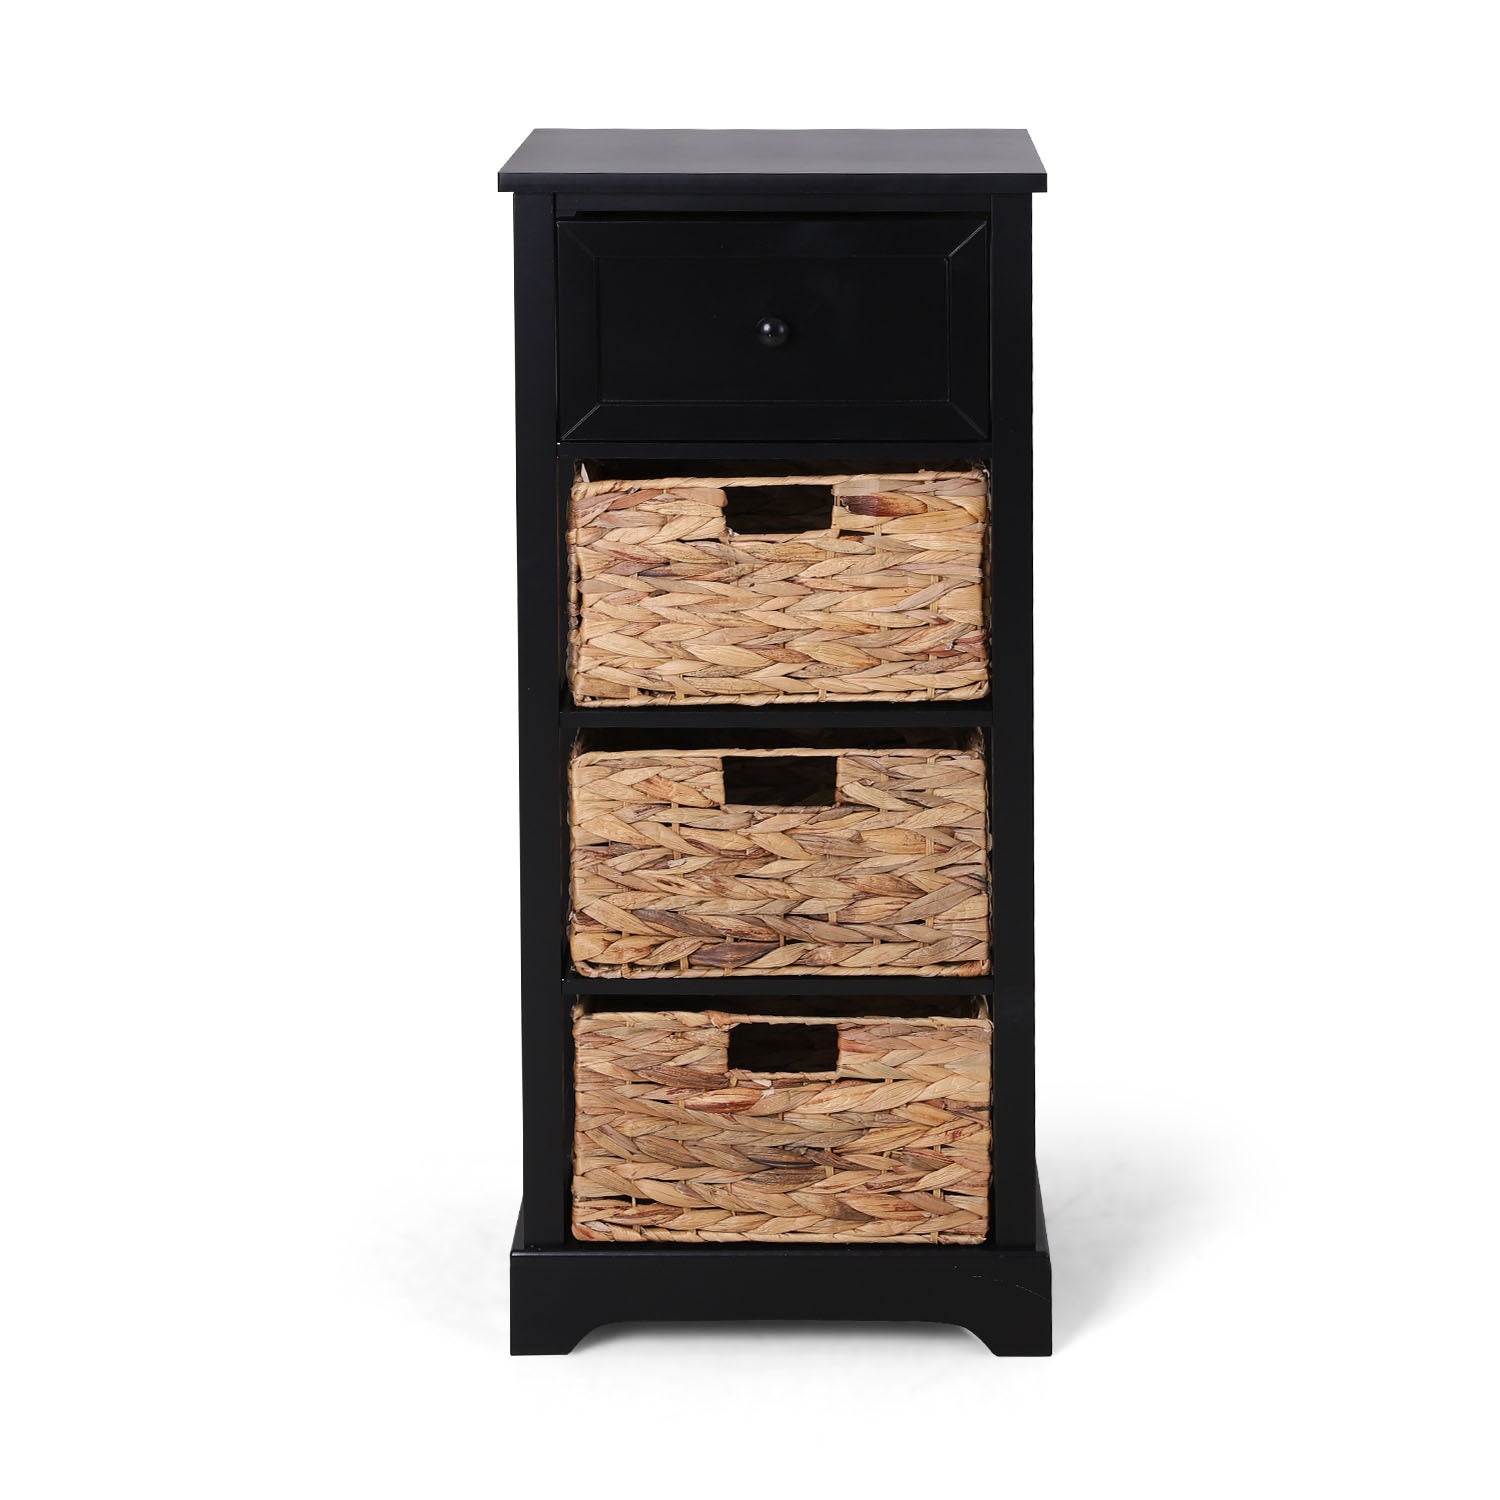 Decorative Storage Cabinet with Removable Woven Baskets -MFSTUDIO